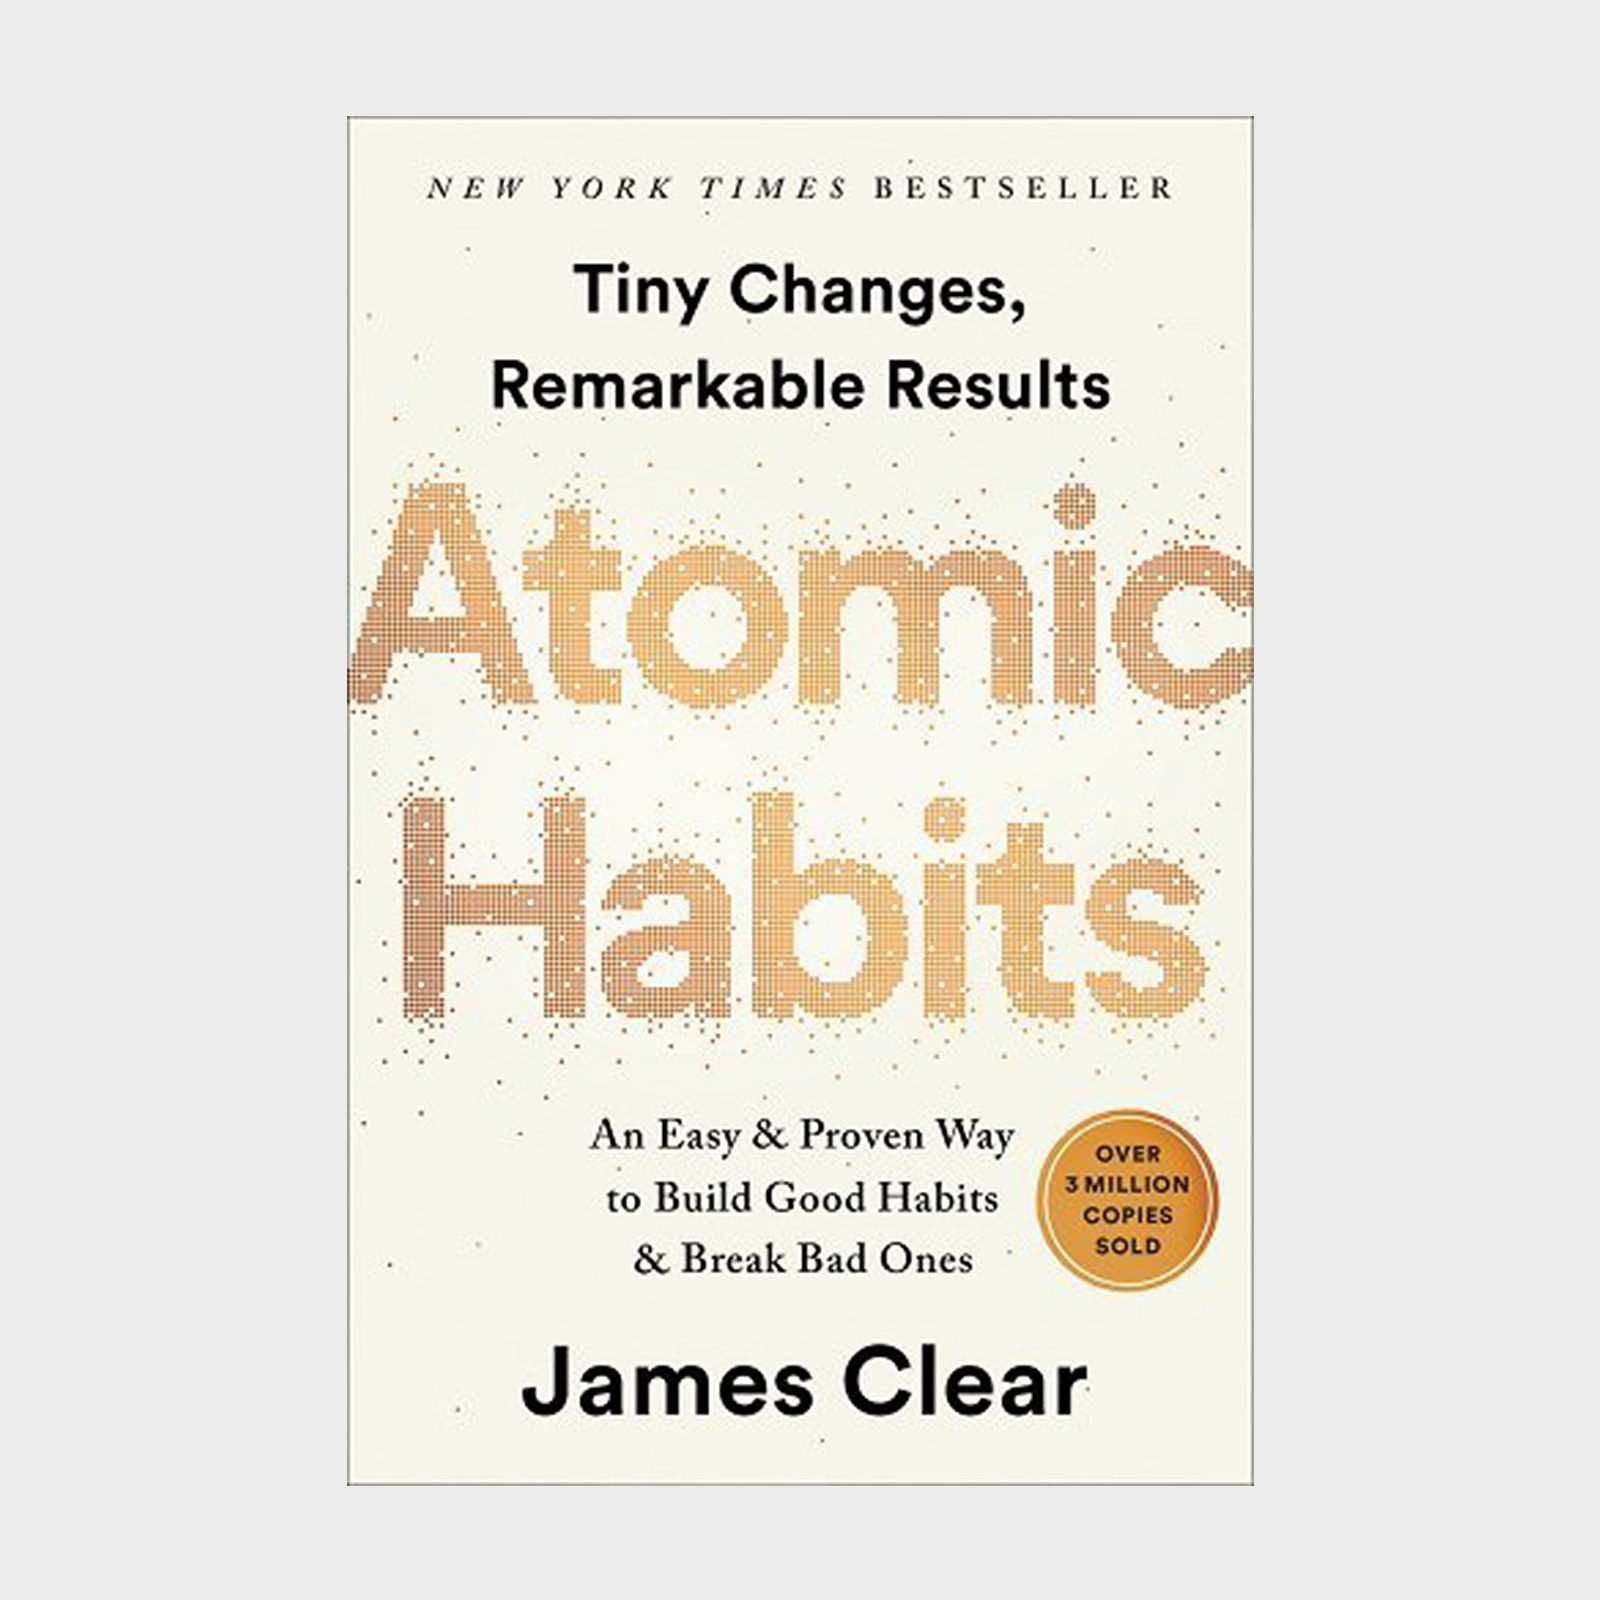 <p>If you've ever wanted to change something about your life but found it overwhelming, <em>Atomic Habits</em> can get you to the other side, step-by-step. With more than two million copies sold since it was published in 2018, it's one of the most popular self-improvement books, and a great <a href="https://www.rd.com/list/best-coffee-table-book-to-gift-this-year/">book to gift</a>. Habit formation expert James Clear helps readers think about their goals in terms of little shifts they can make that can be broken down into more and more manageable pieces. By incorporating one tiny habit at a time, you can create real and lasting change.</p> <p class="listicle-page__cta-button-shop"><a class="shop-btn" href="https://bookshop.org/books/atomic-habits-an-easy-proven-way-to-build-good-habits-break-bad-ones/9780735211292">Shop Now</a></p>